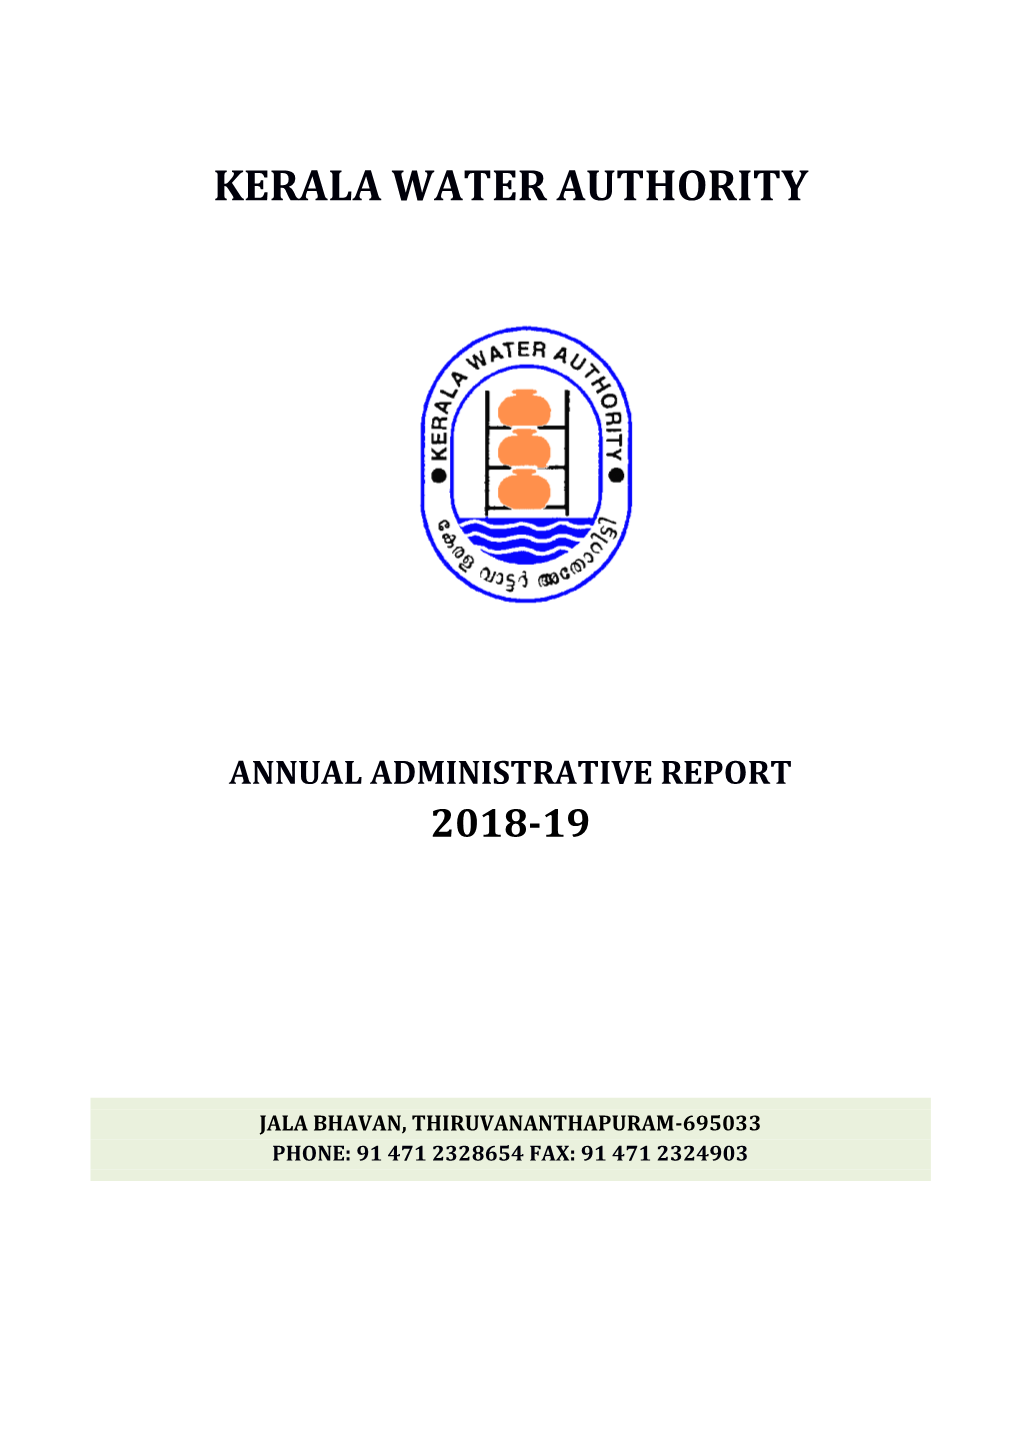 Kerala Water Authority Annual Administrative Report 2018-19